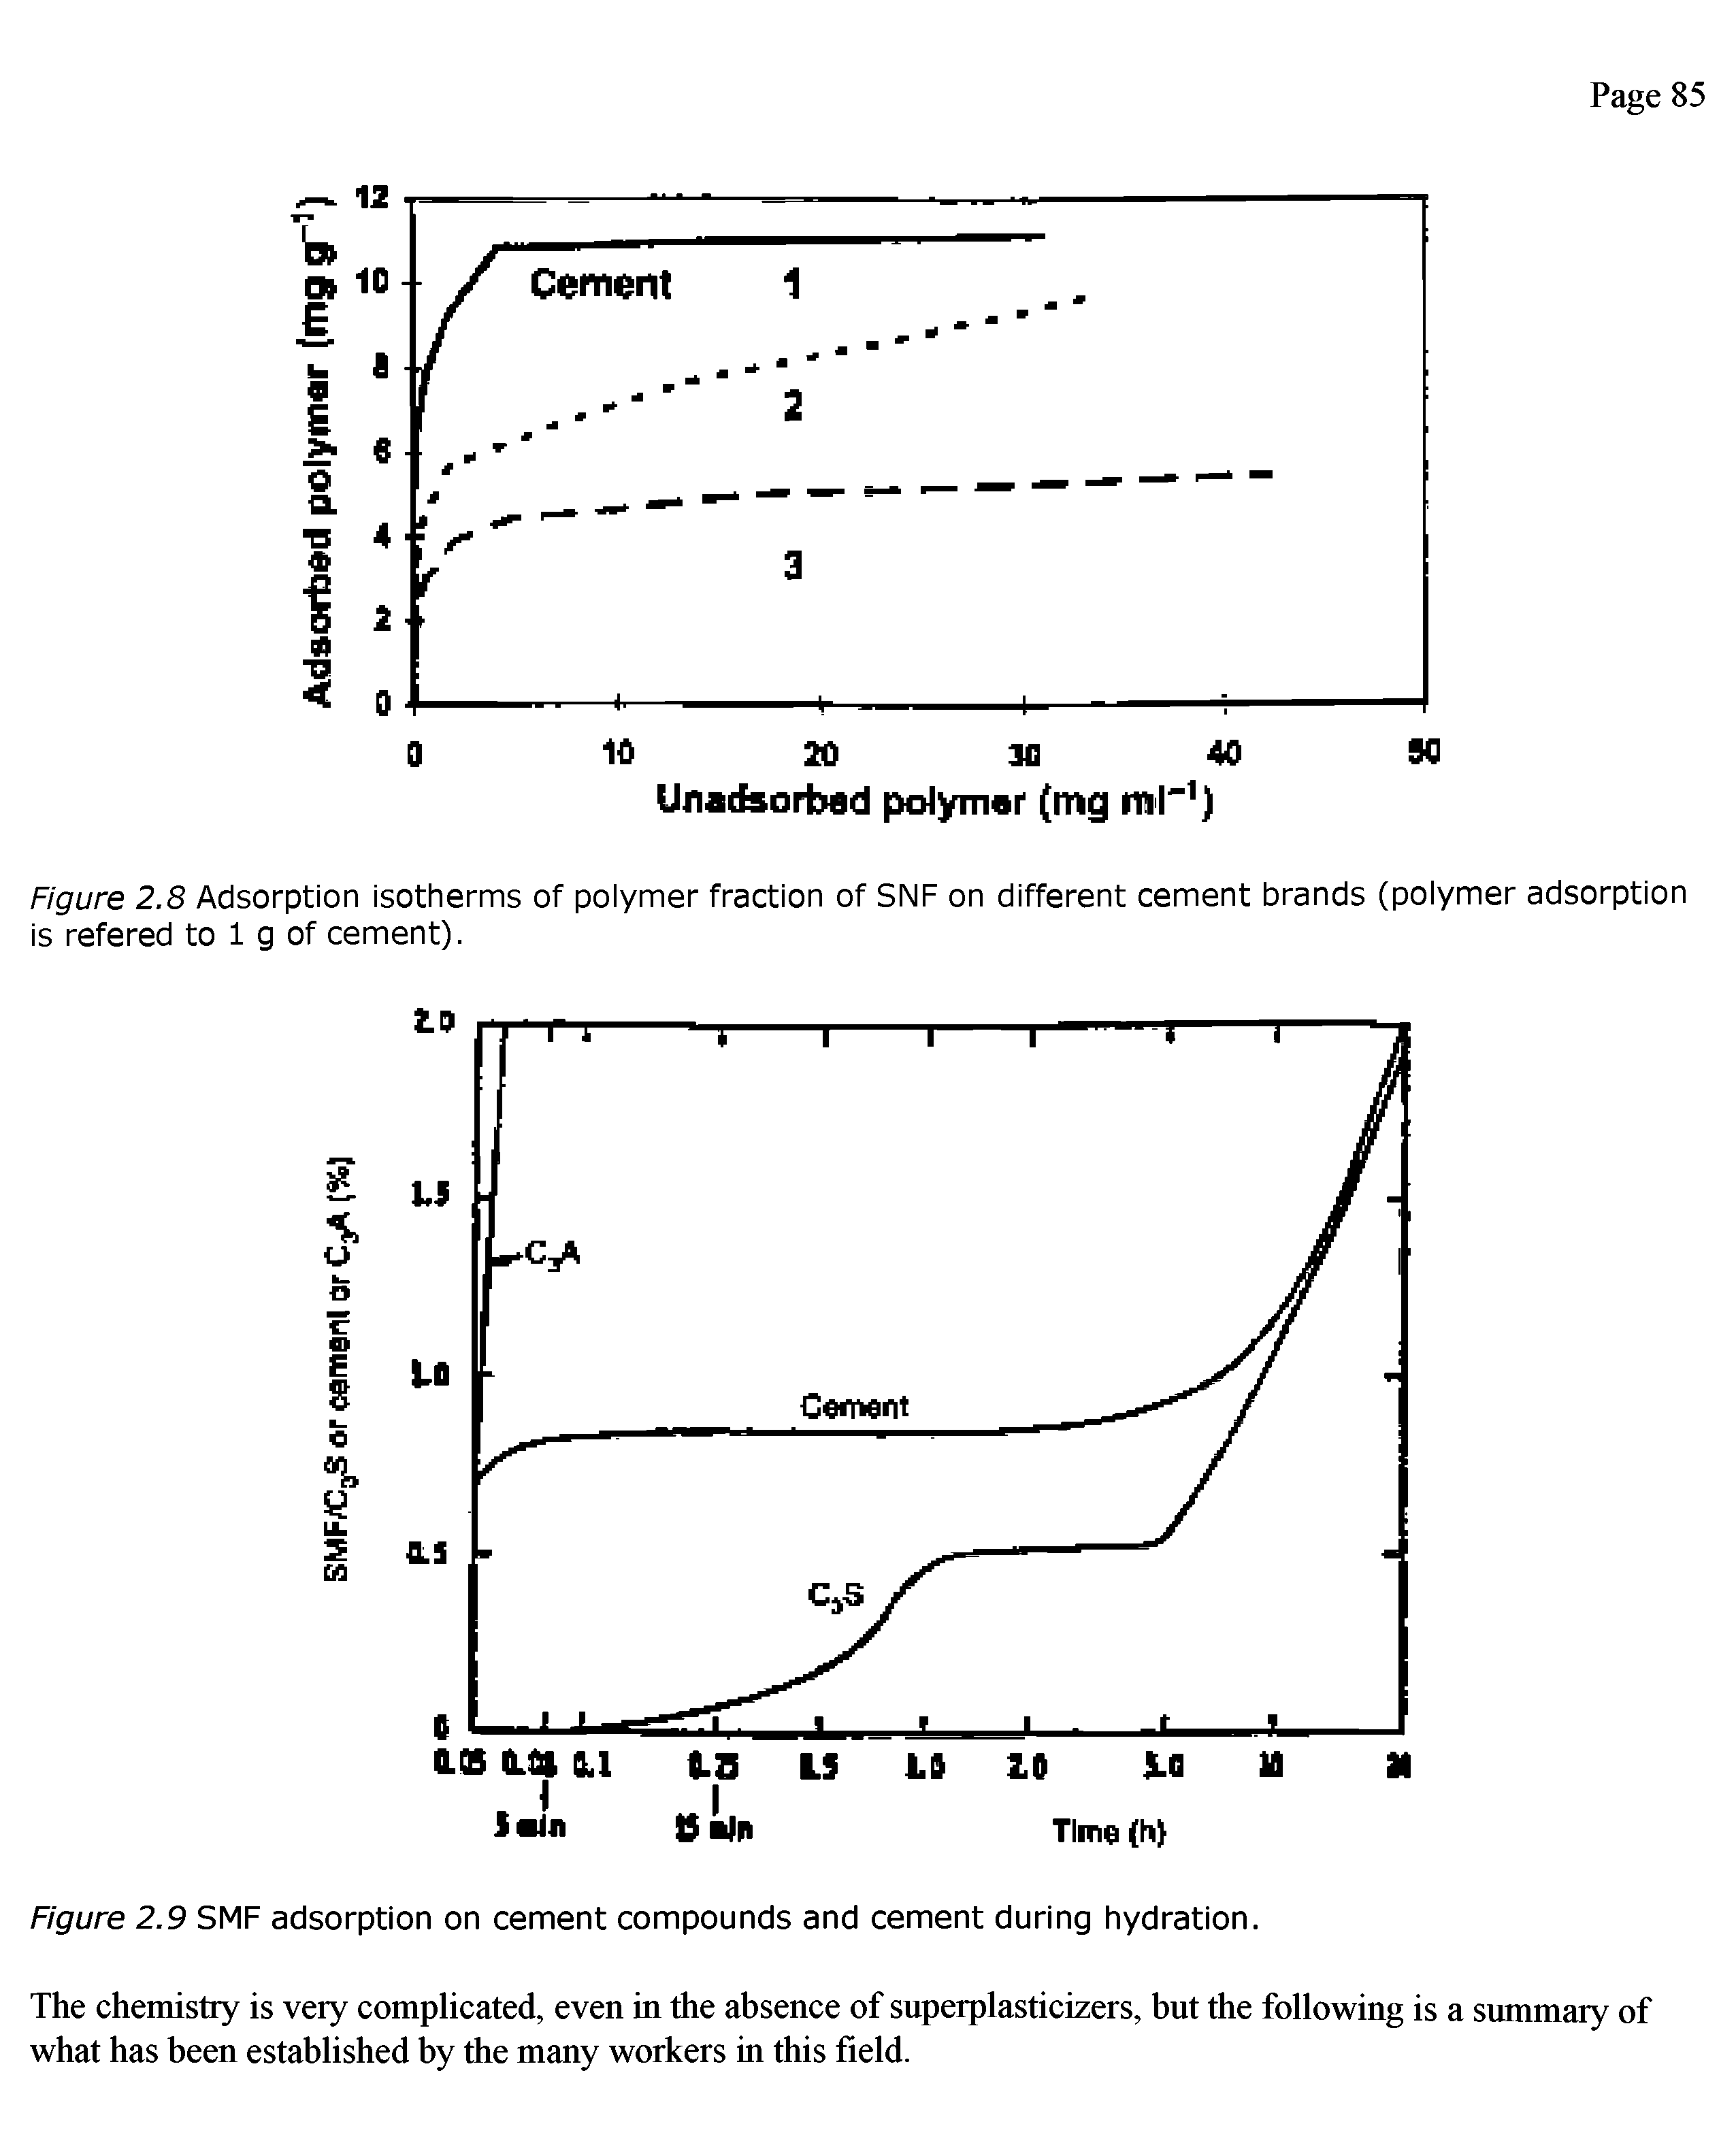 Figure 2.8 Adsorption isotherms of polymer fraction of SNF on different cement brands (polymer adsorption is refered to 1 g of cement).